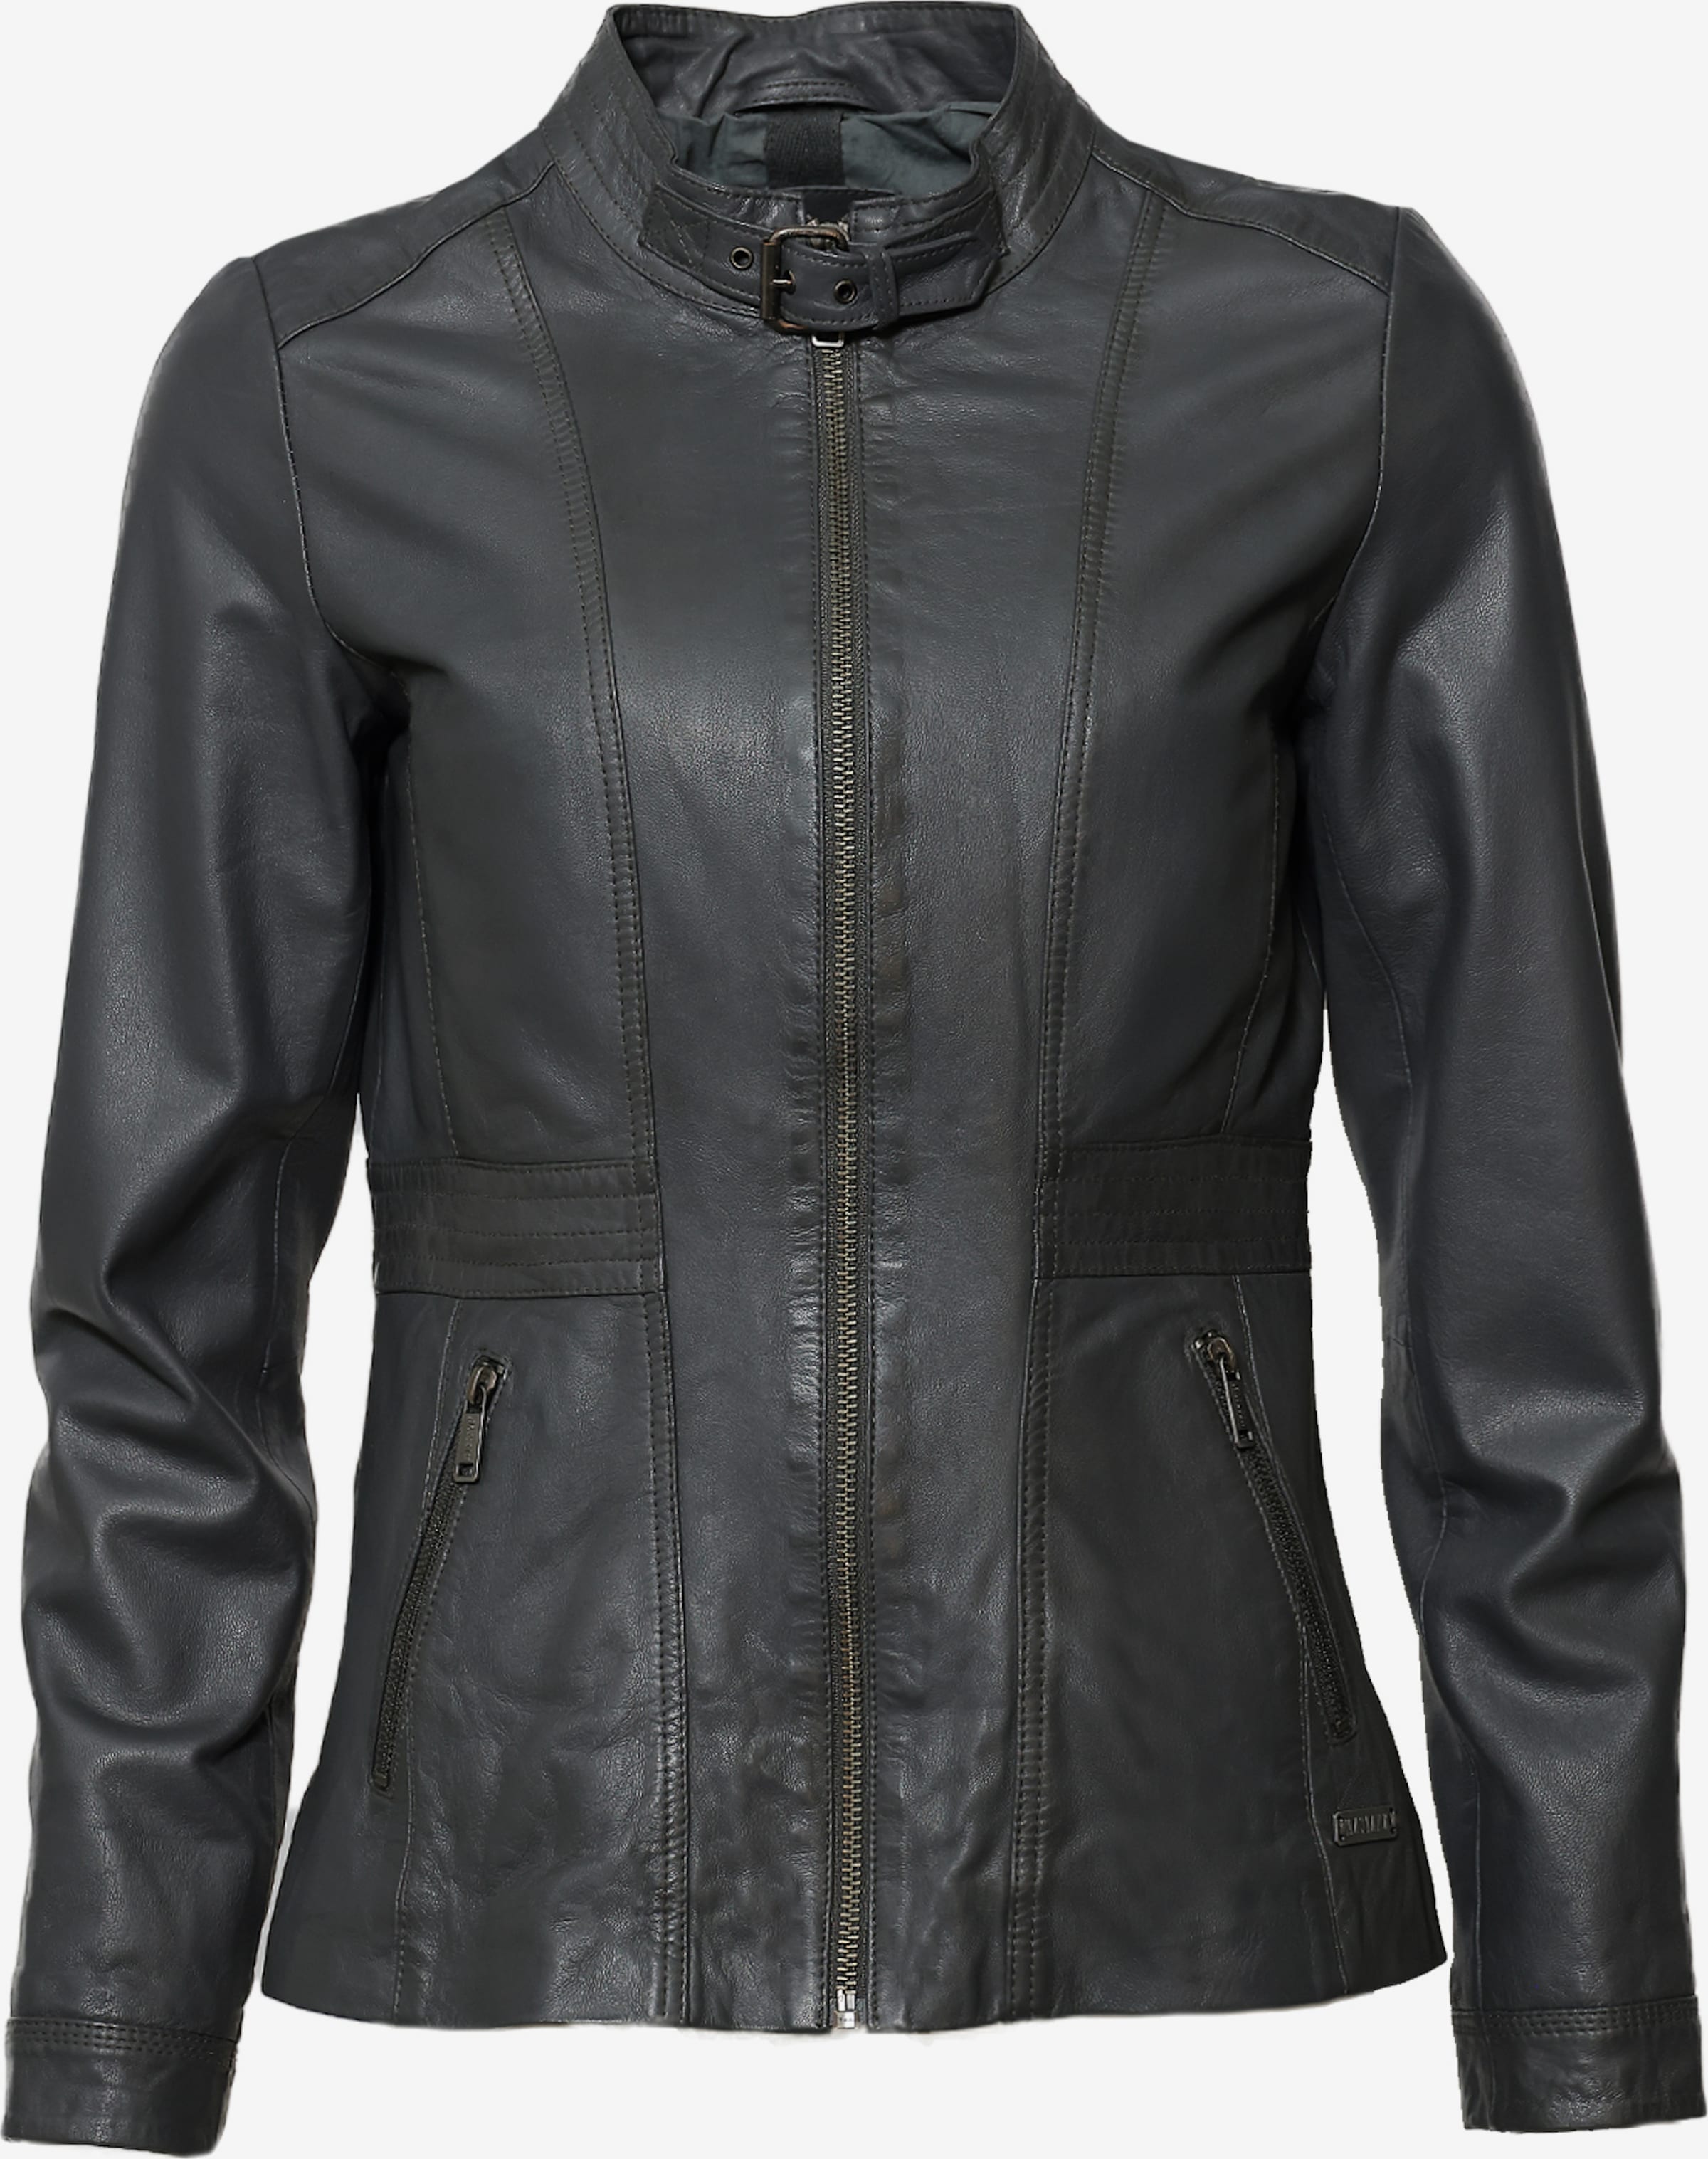 Anthracite Jacket \' Between-Season YOU 31017263 | ABOUT in \' MUSTANG